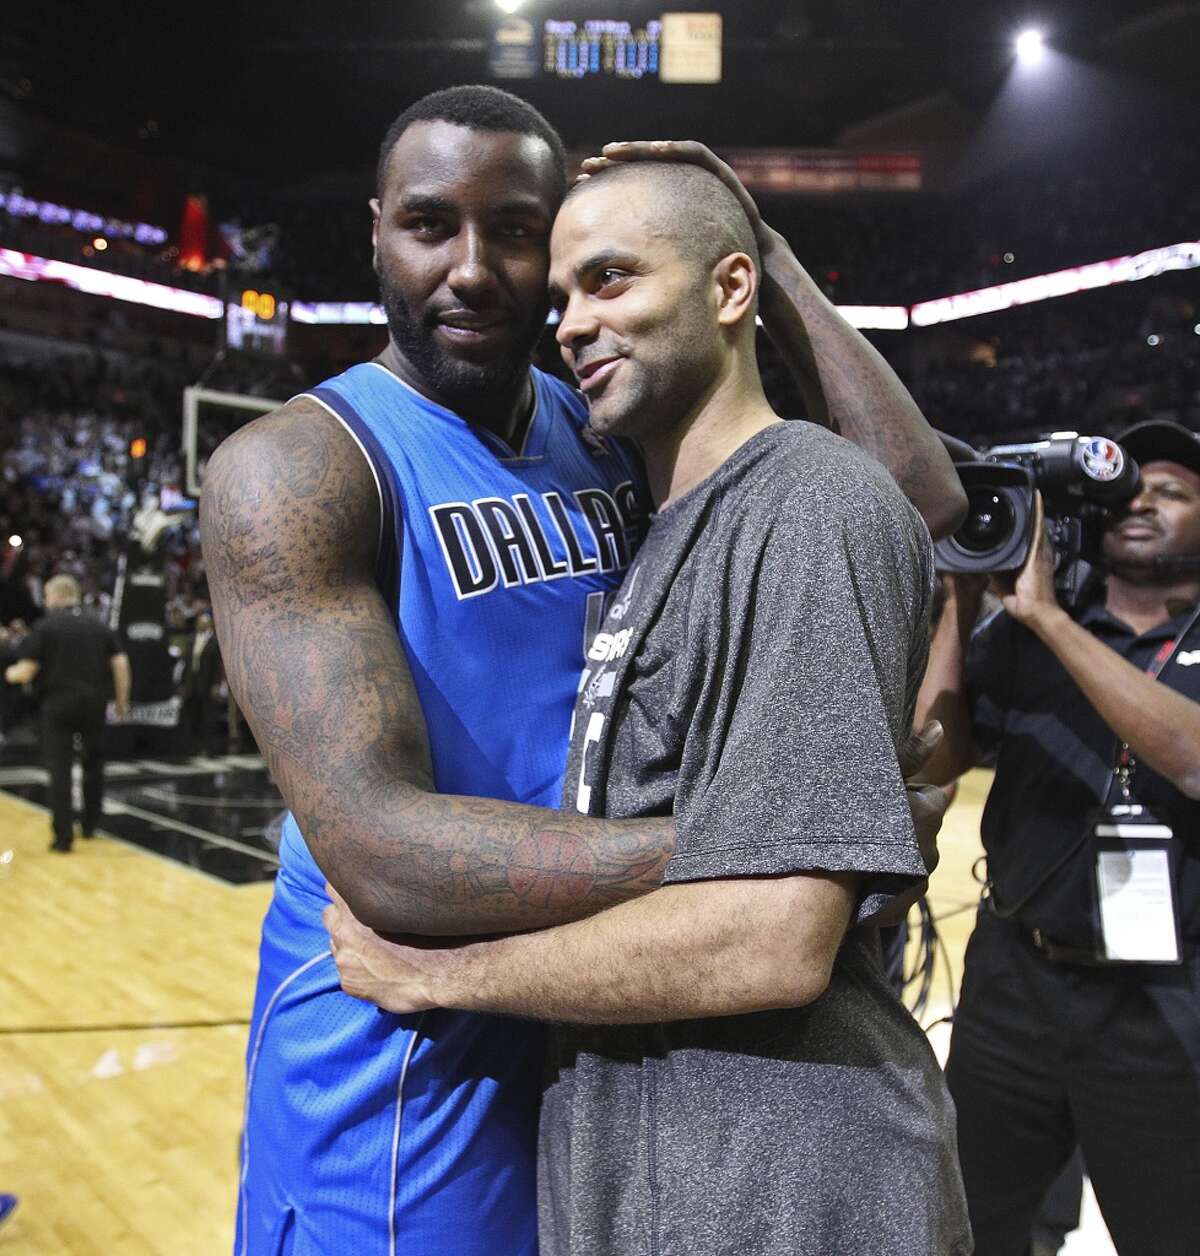 San Antonio Spurs' Tony Parker hugs Dallas Mavericks' DeJuan Blair at the end of game seven in the first round of the Western Conference Playoffs at the AT&T Center, Sunday, May 4, 2014. The Spurs won, 119-96 to move on to the conference semi-finals against the Portland Trailblazers.